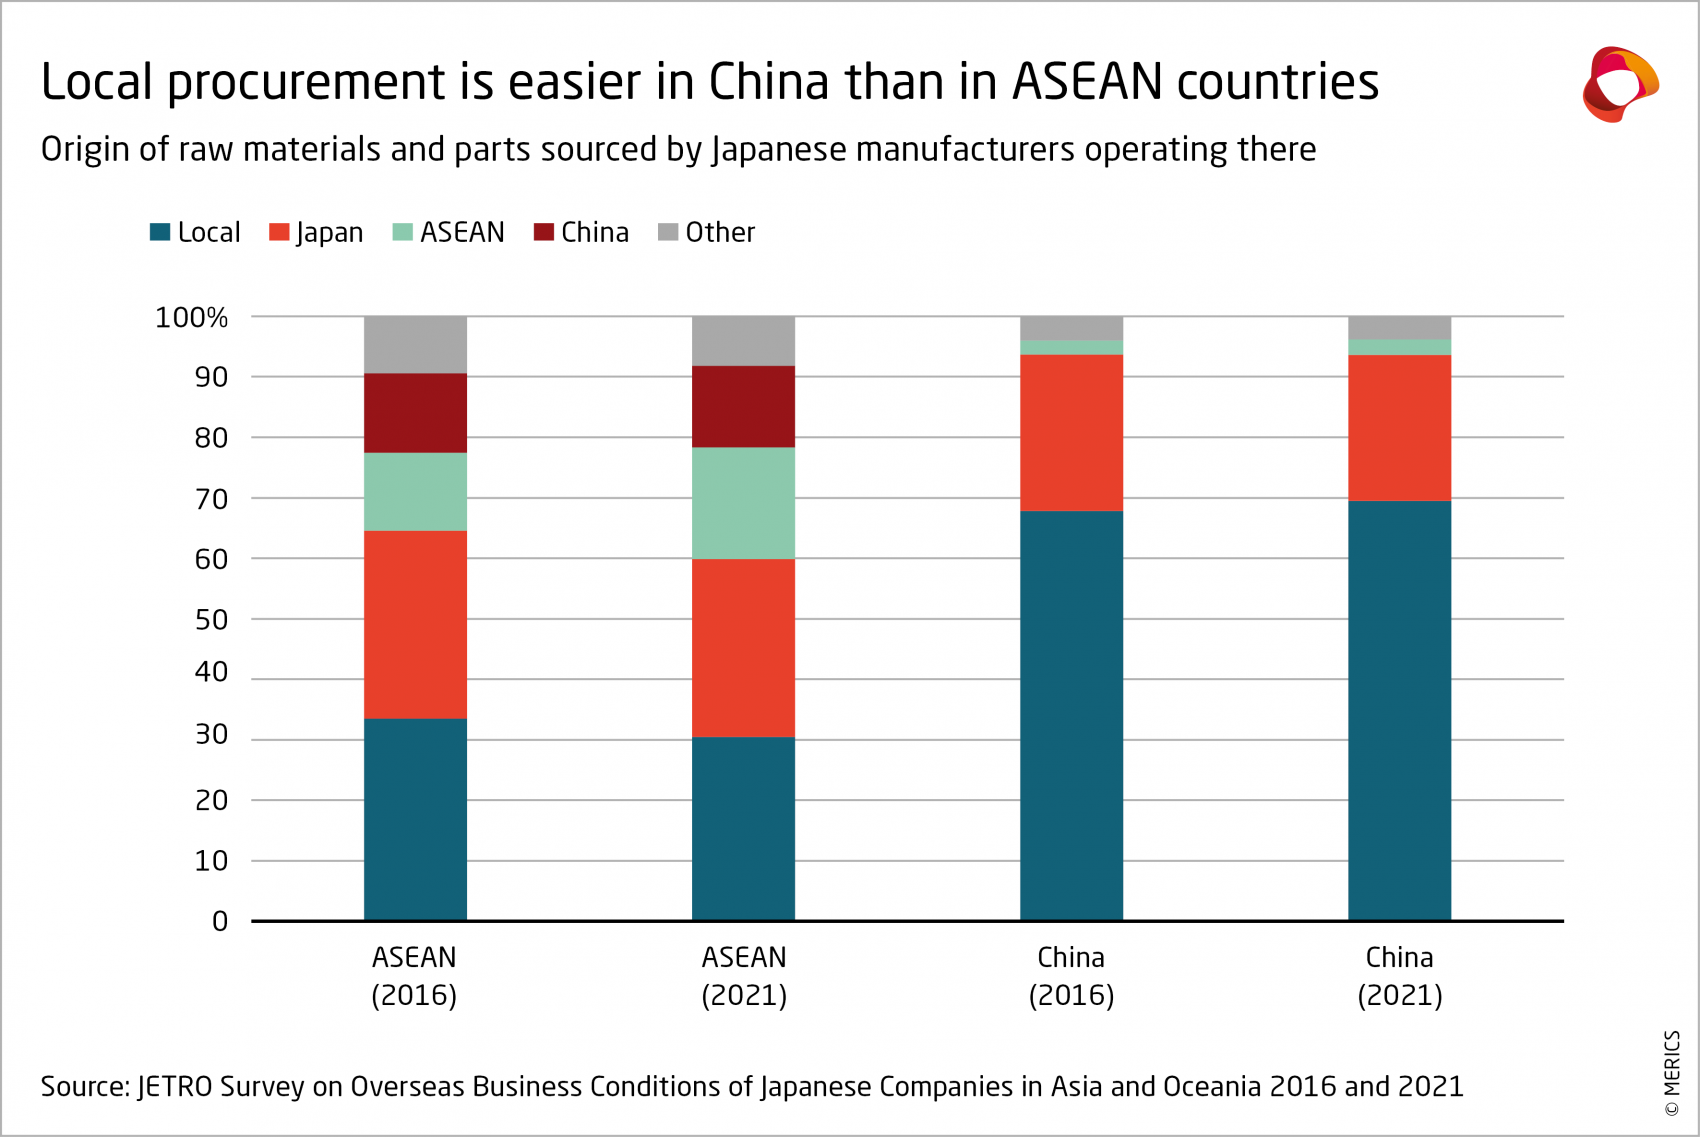 MERICS-Short-Analysis-Local-procurement-is-easier-in-China-than-in-ASEAN-countries.png